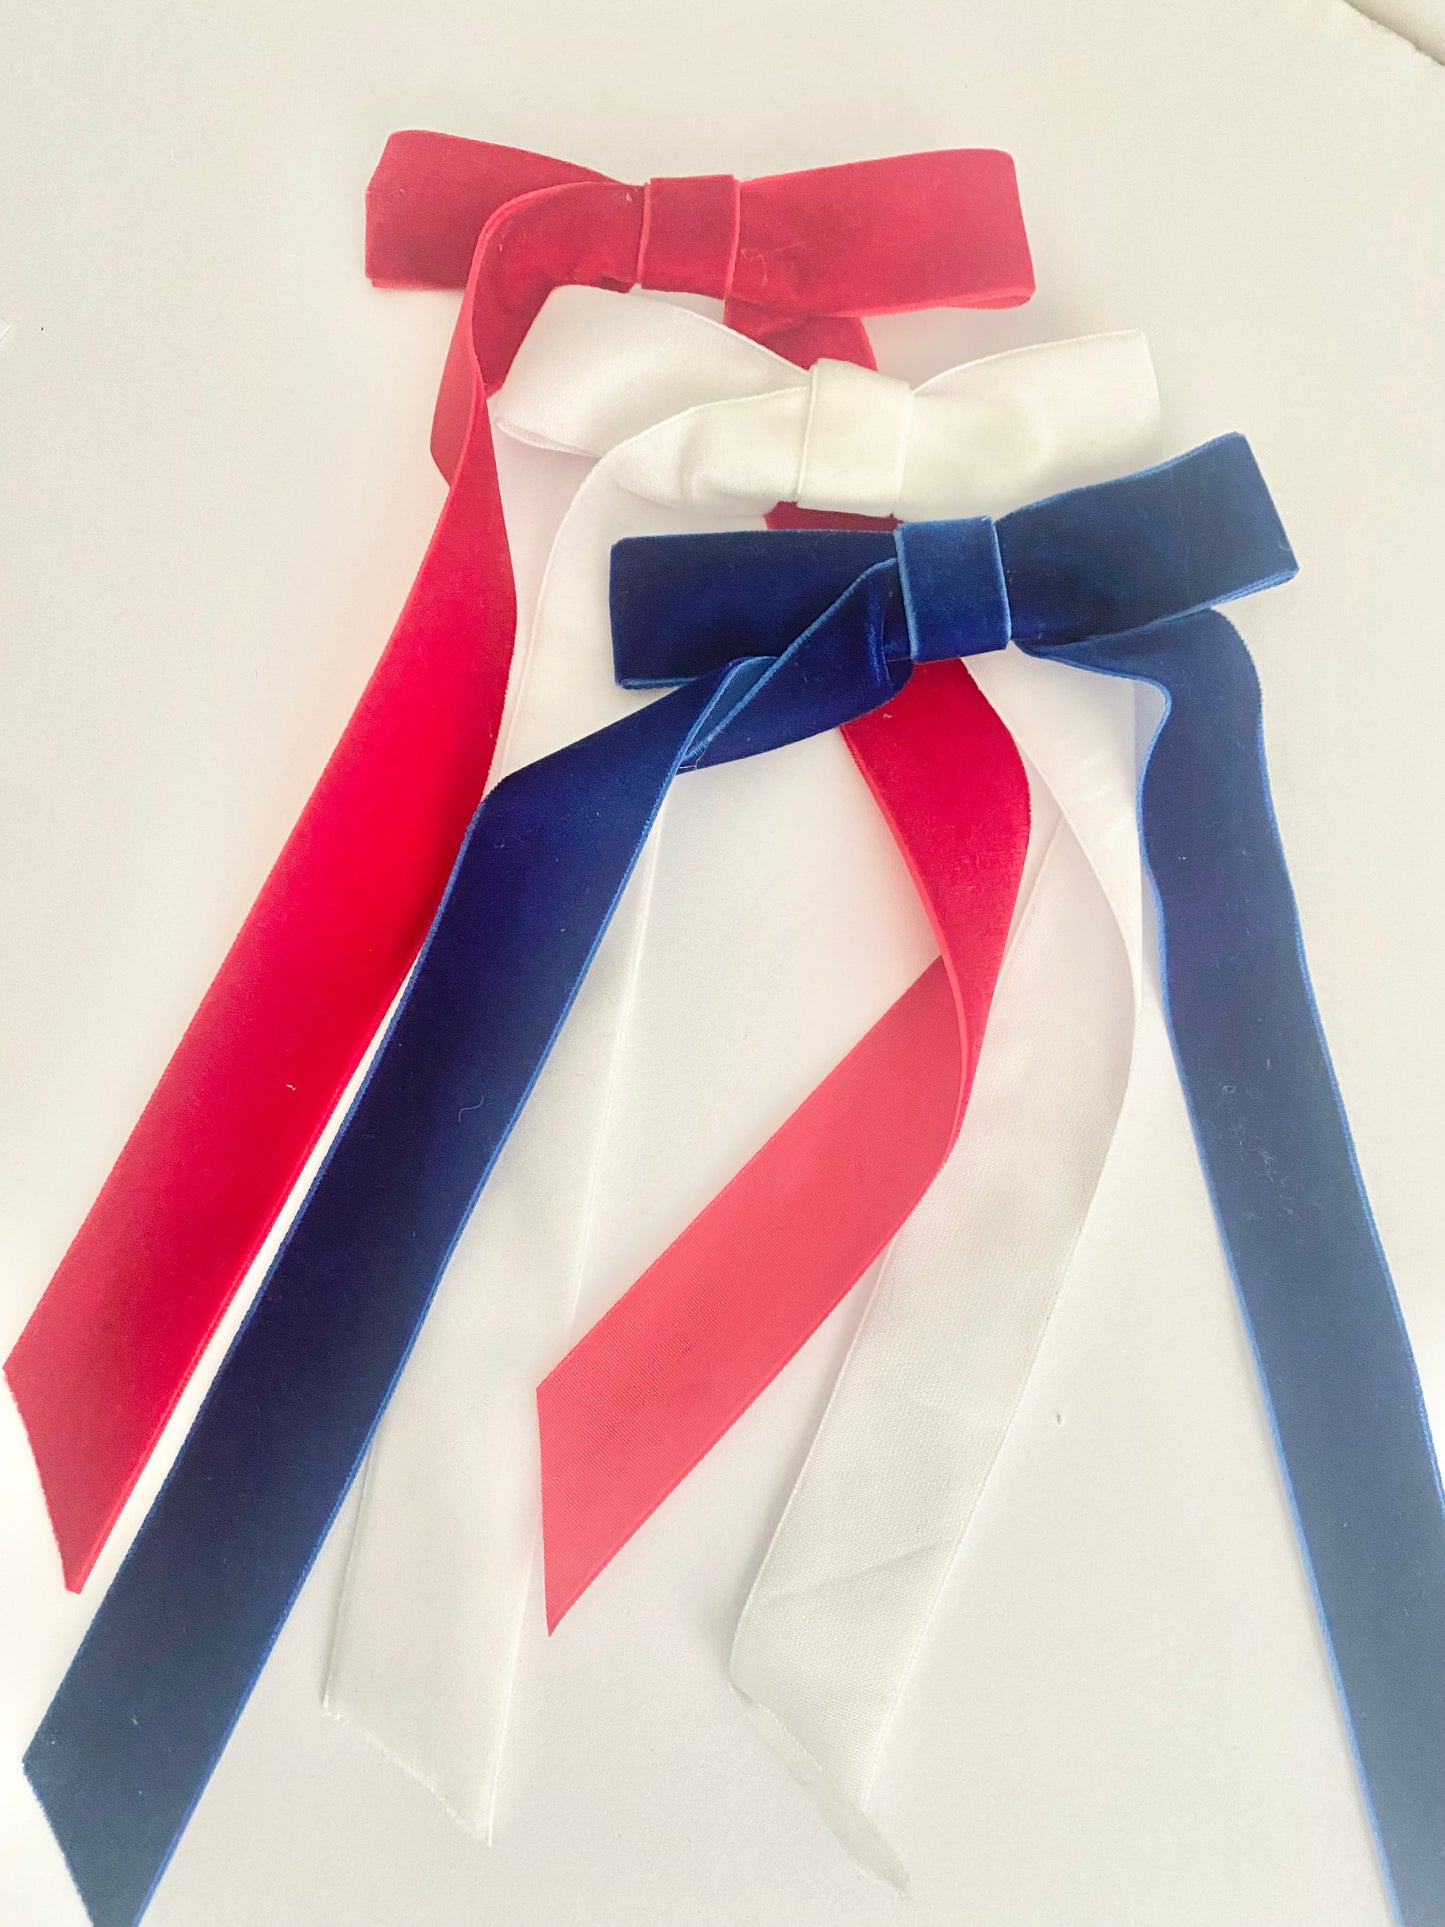 For the Human: Red, White and Blue Hair Bows